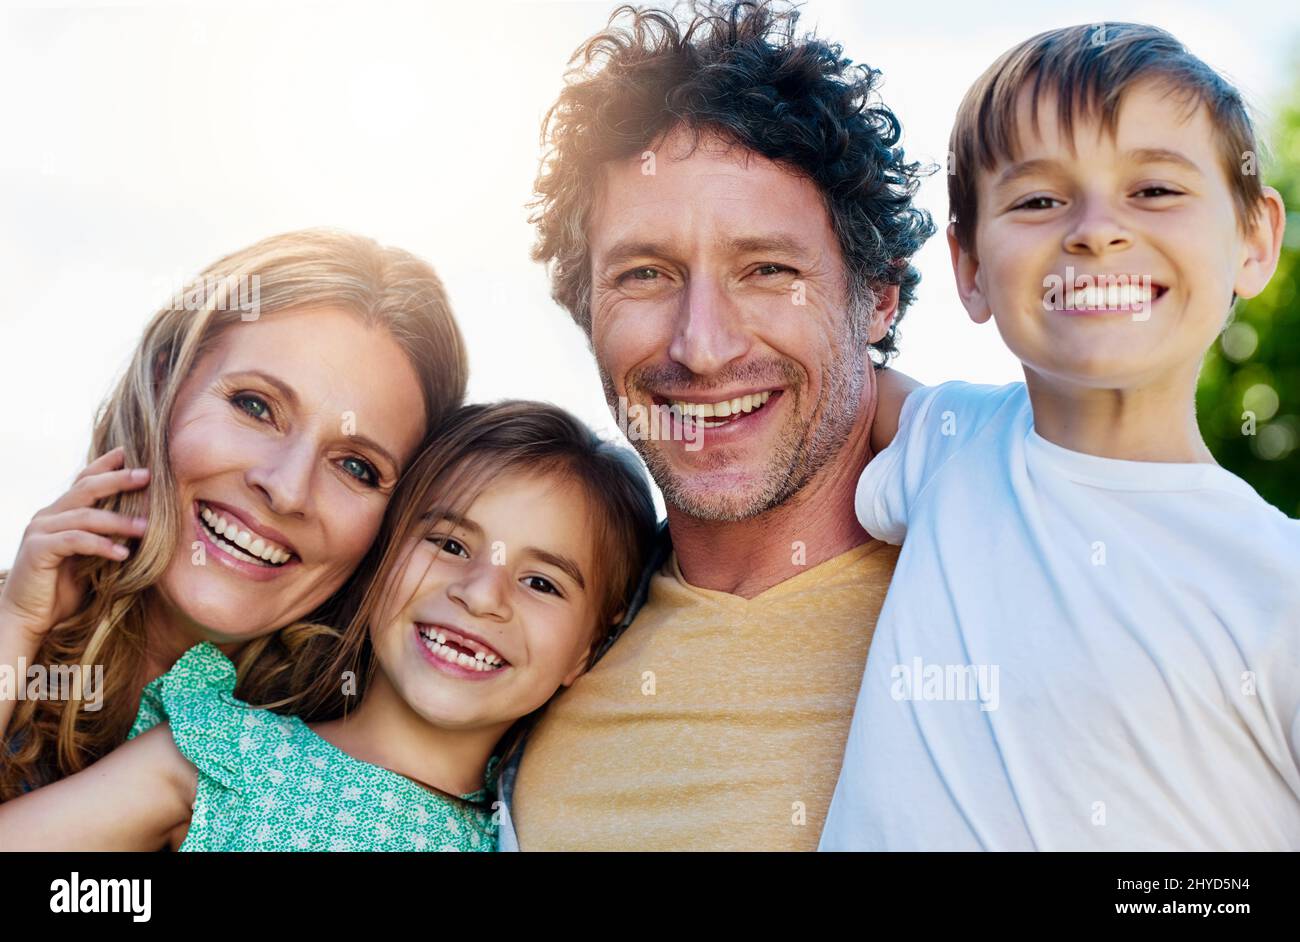 Family time is precious to us. Portrait of a happy family spending time together outdoors. Stock Photo